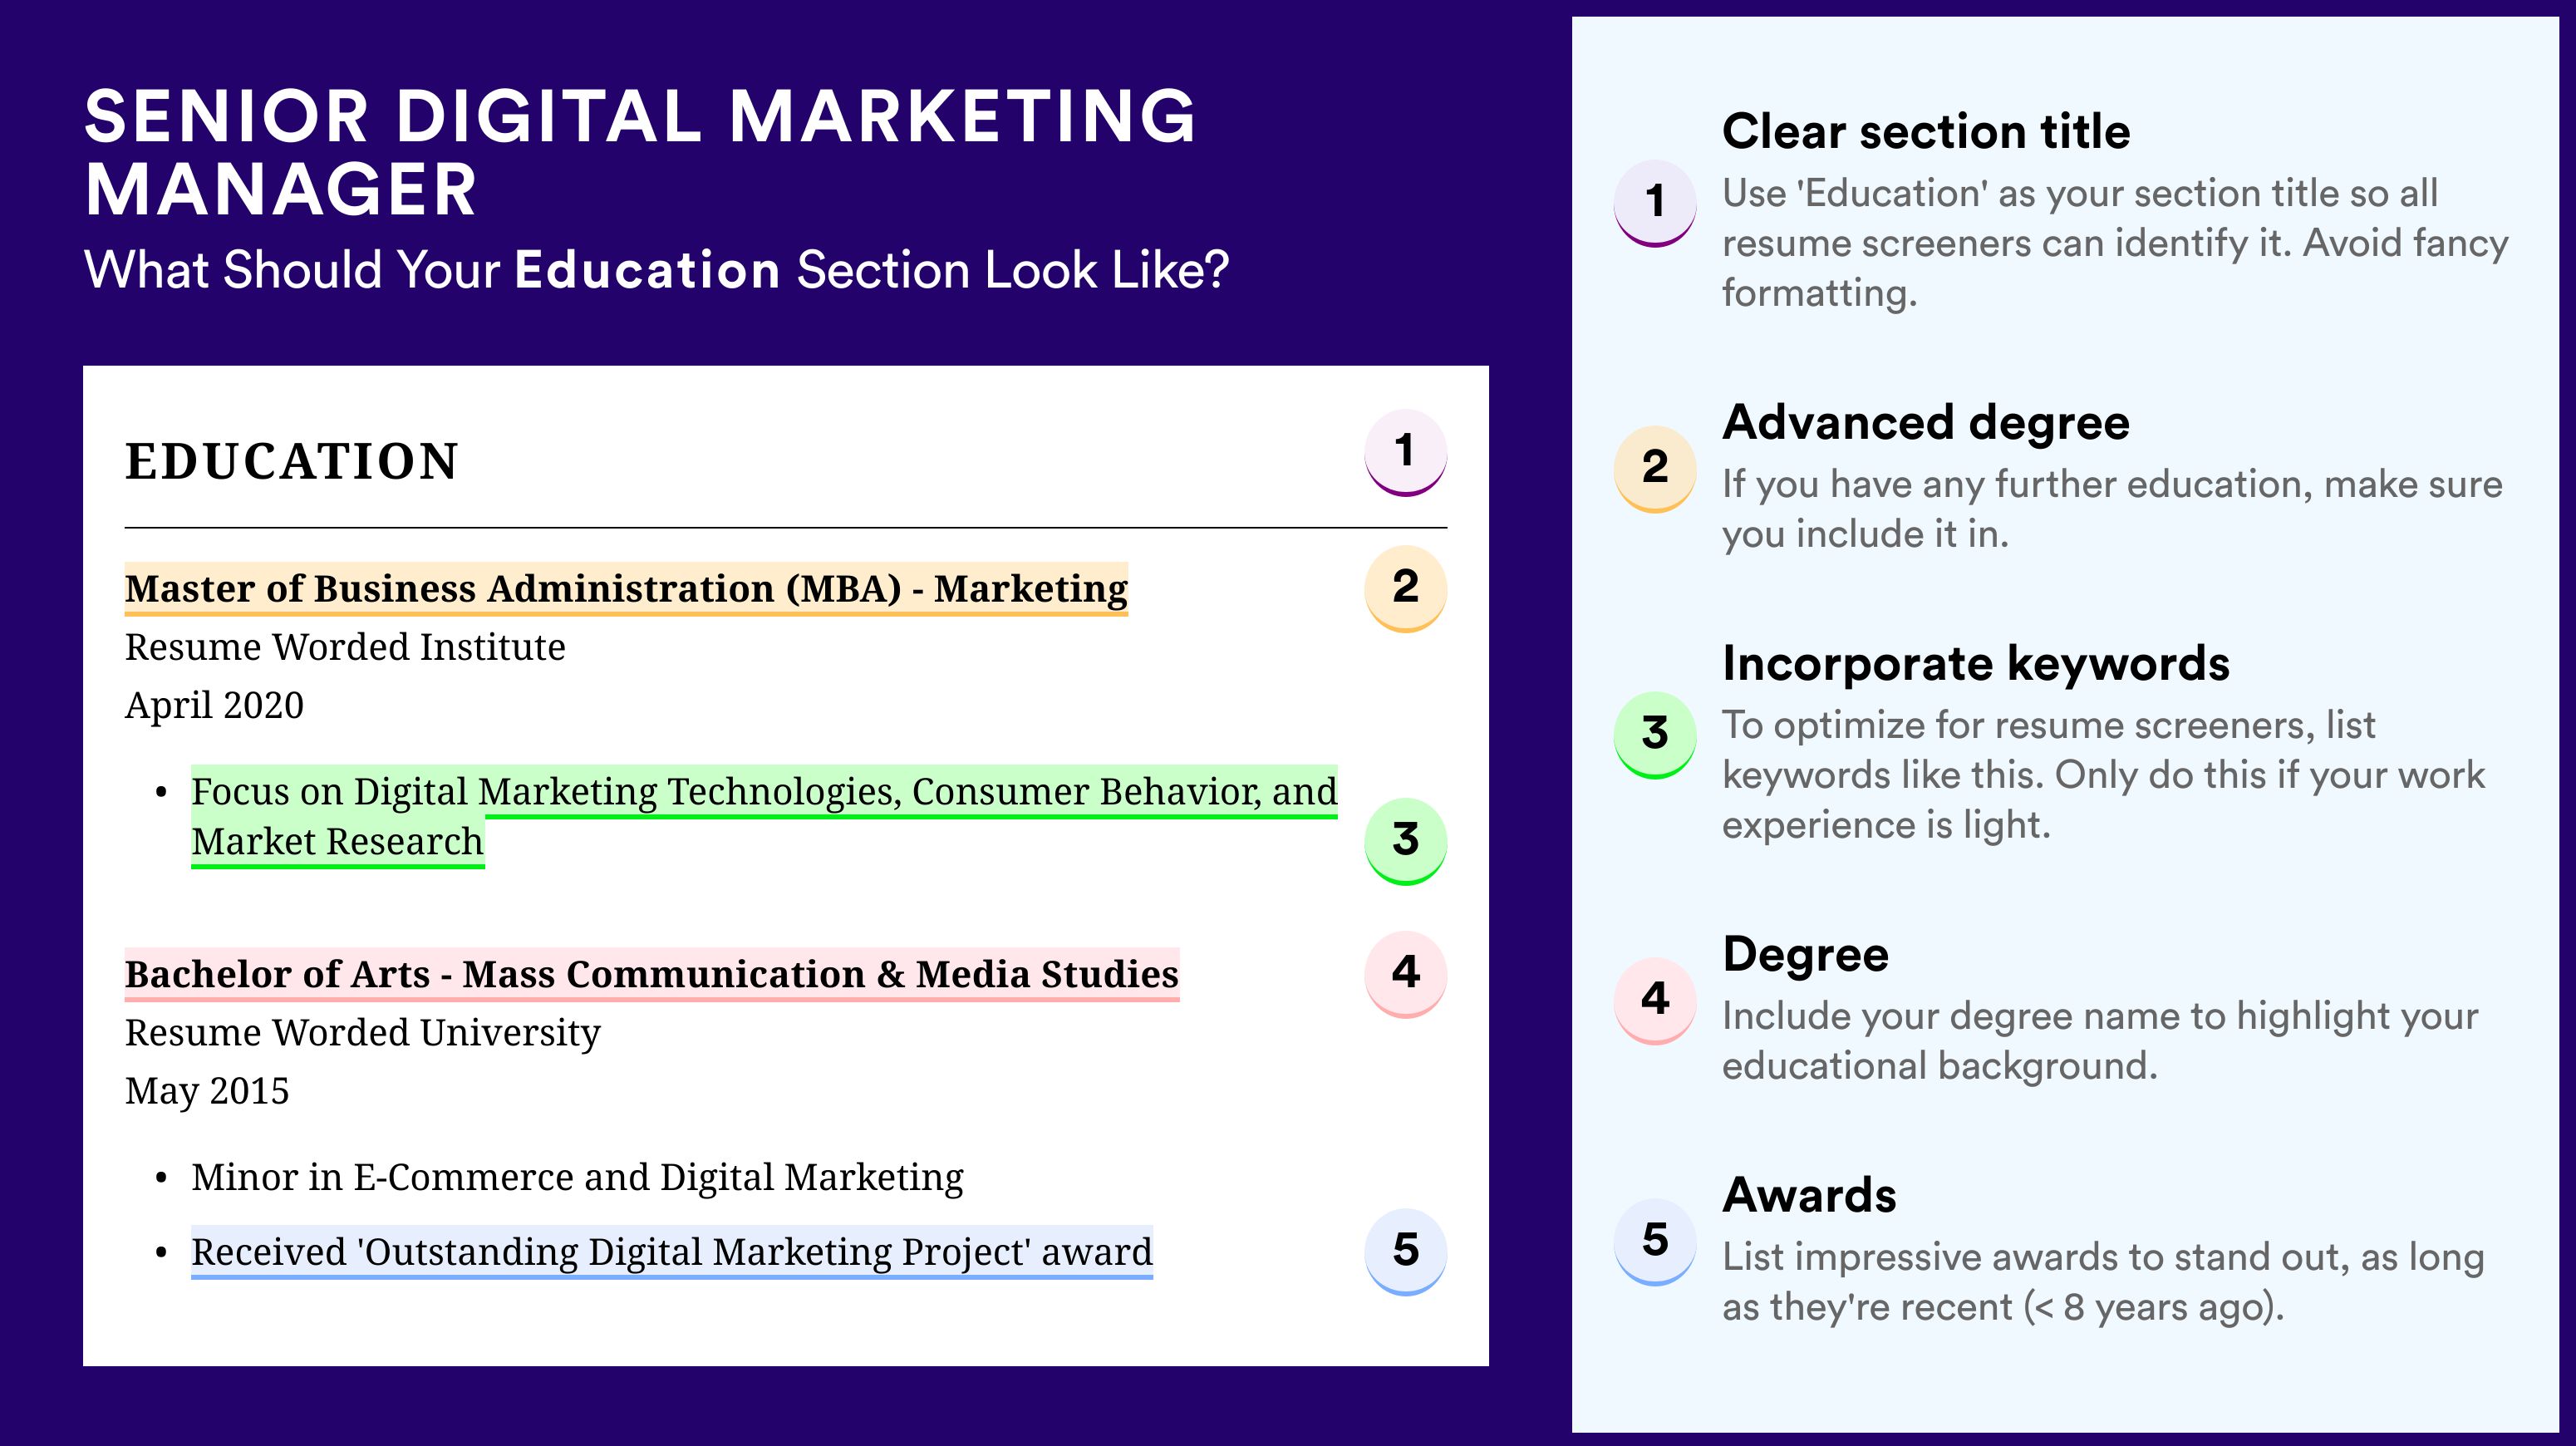 How To Write An Education Section - Senior Digital Marketing Manager Roles